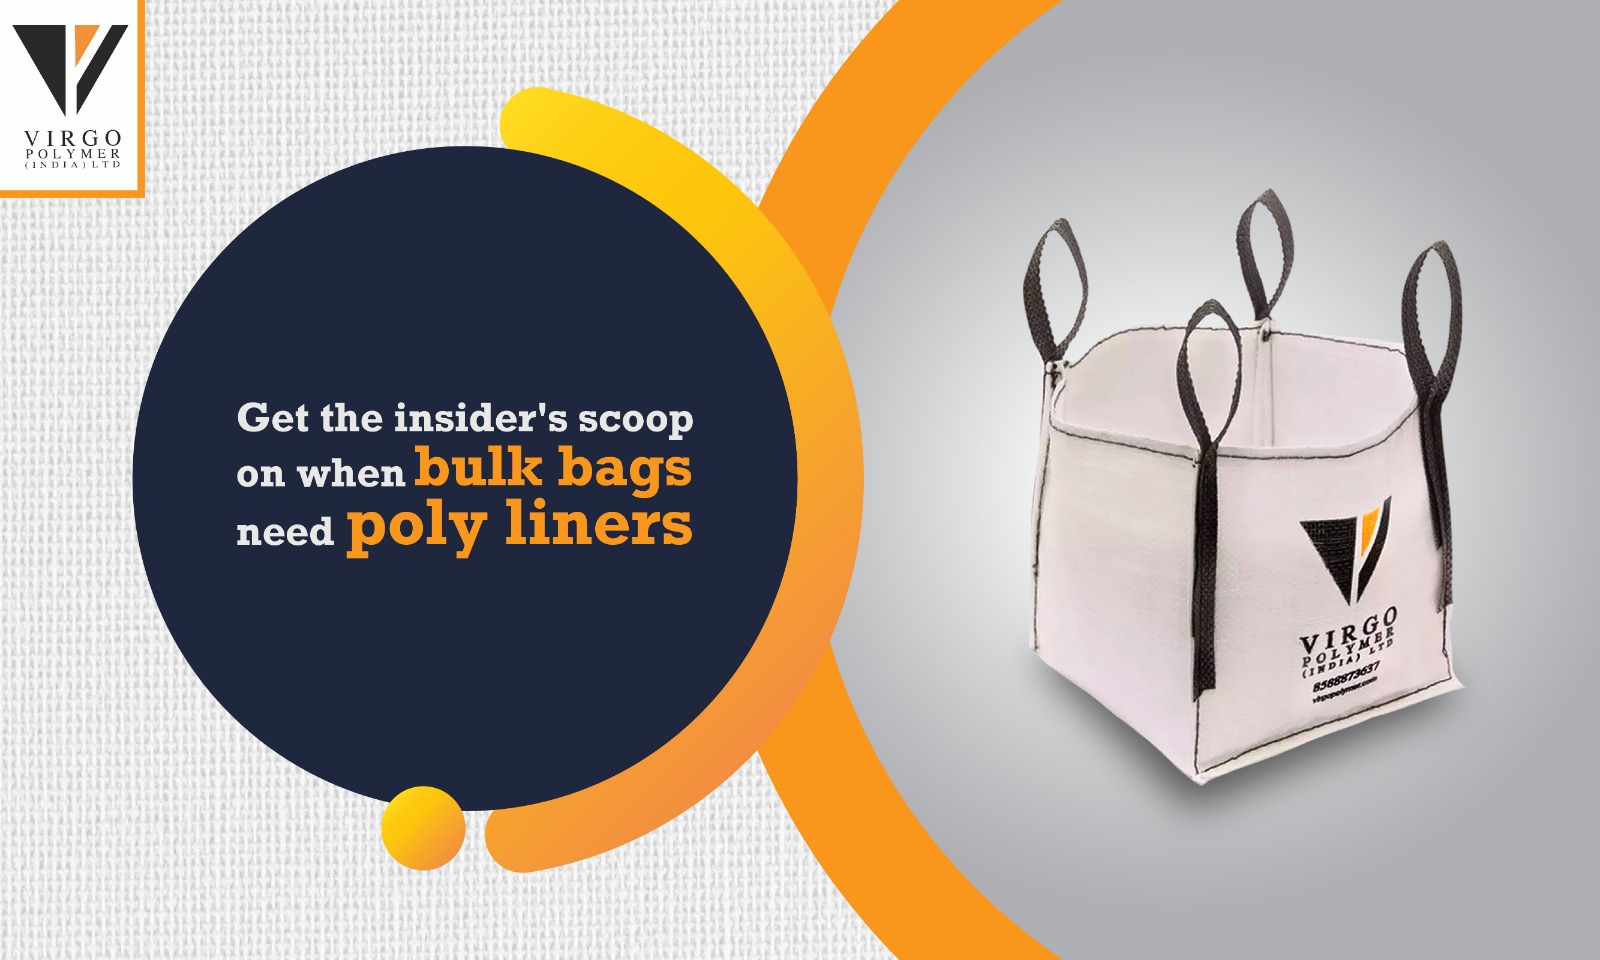 When to Think About Using Poly Liners for Bulk Bags
